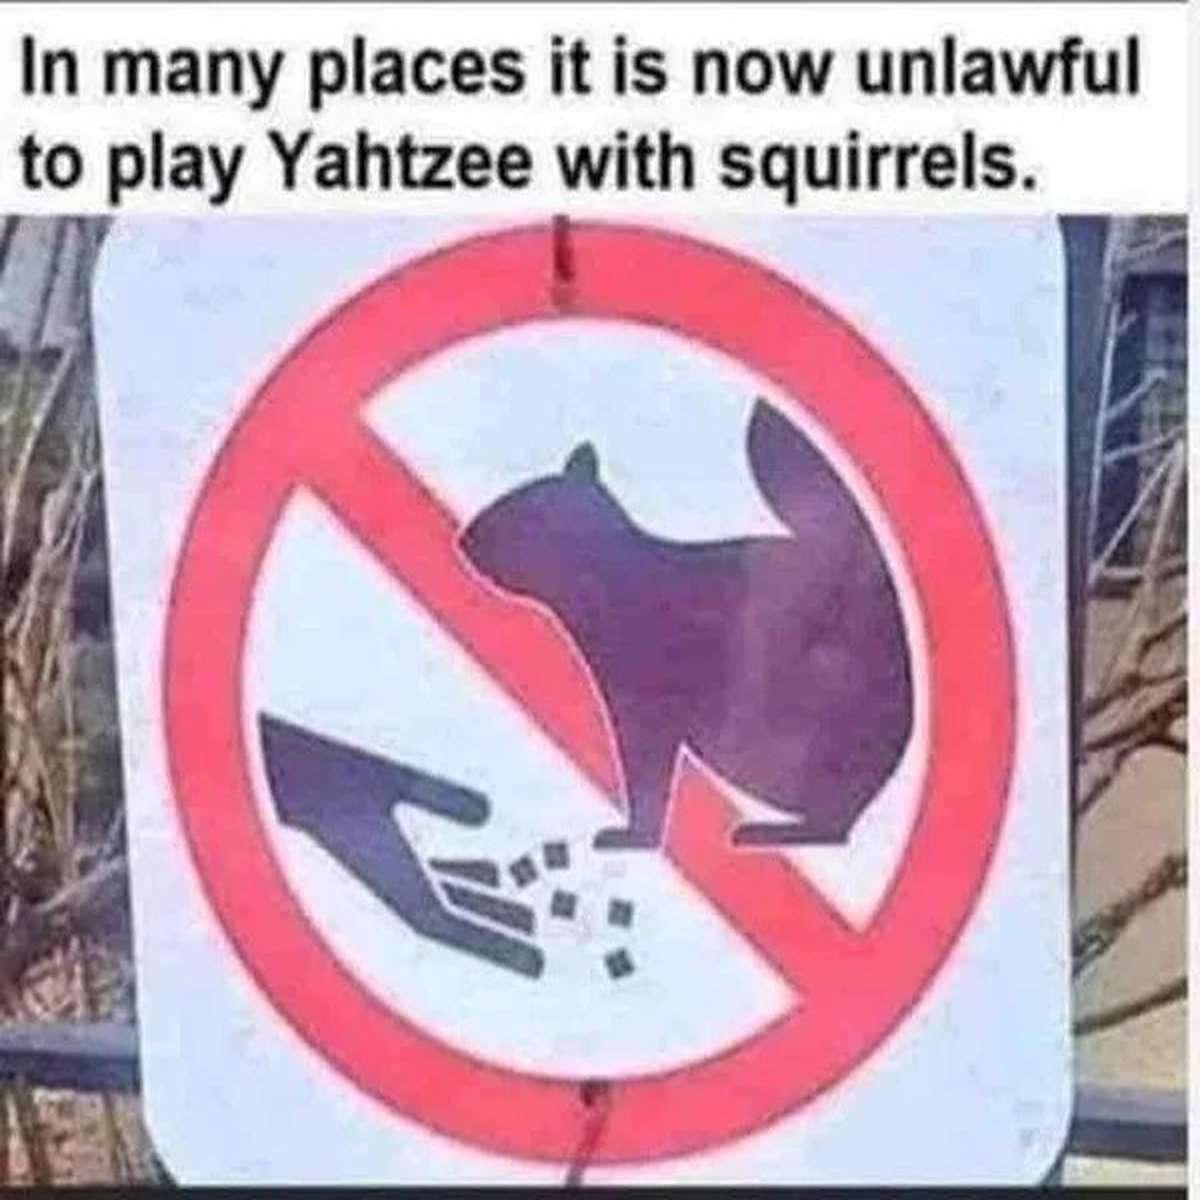 dank memes - traffic sign - In many places it is now unlawful to play Yahtzee with squirrels.